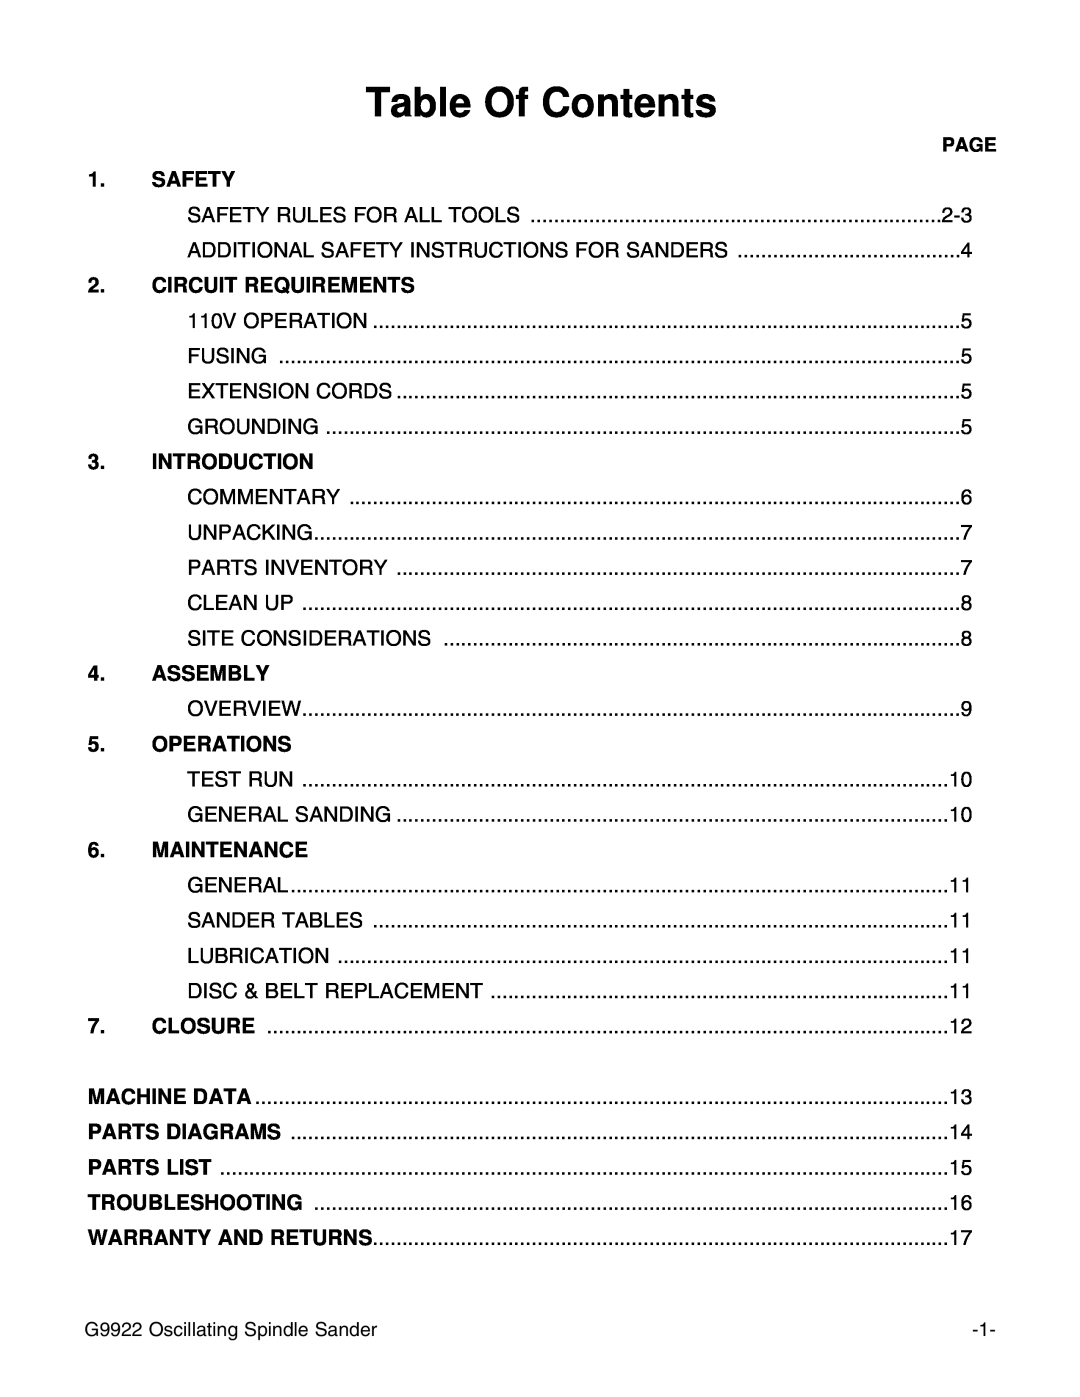 Grizzly G9922 instruction manual Table Of Contents 